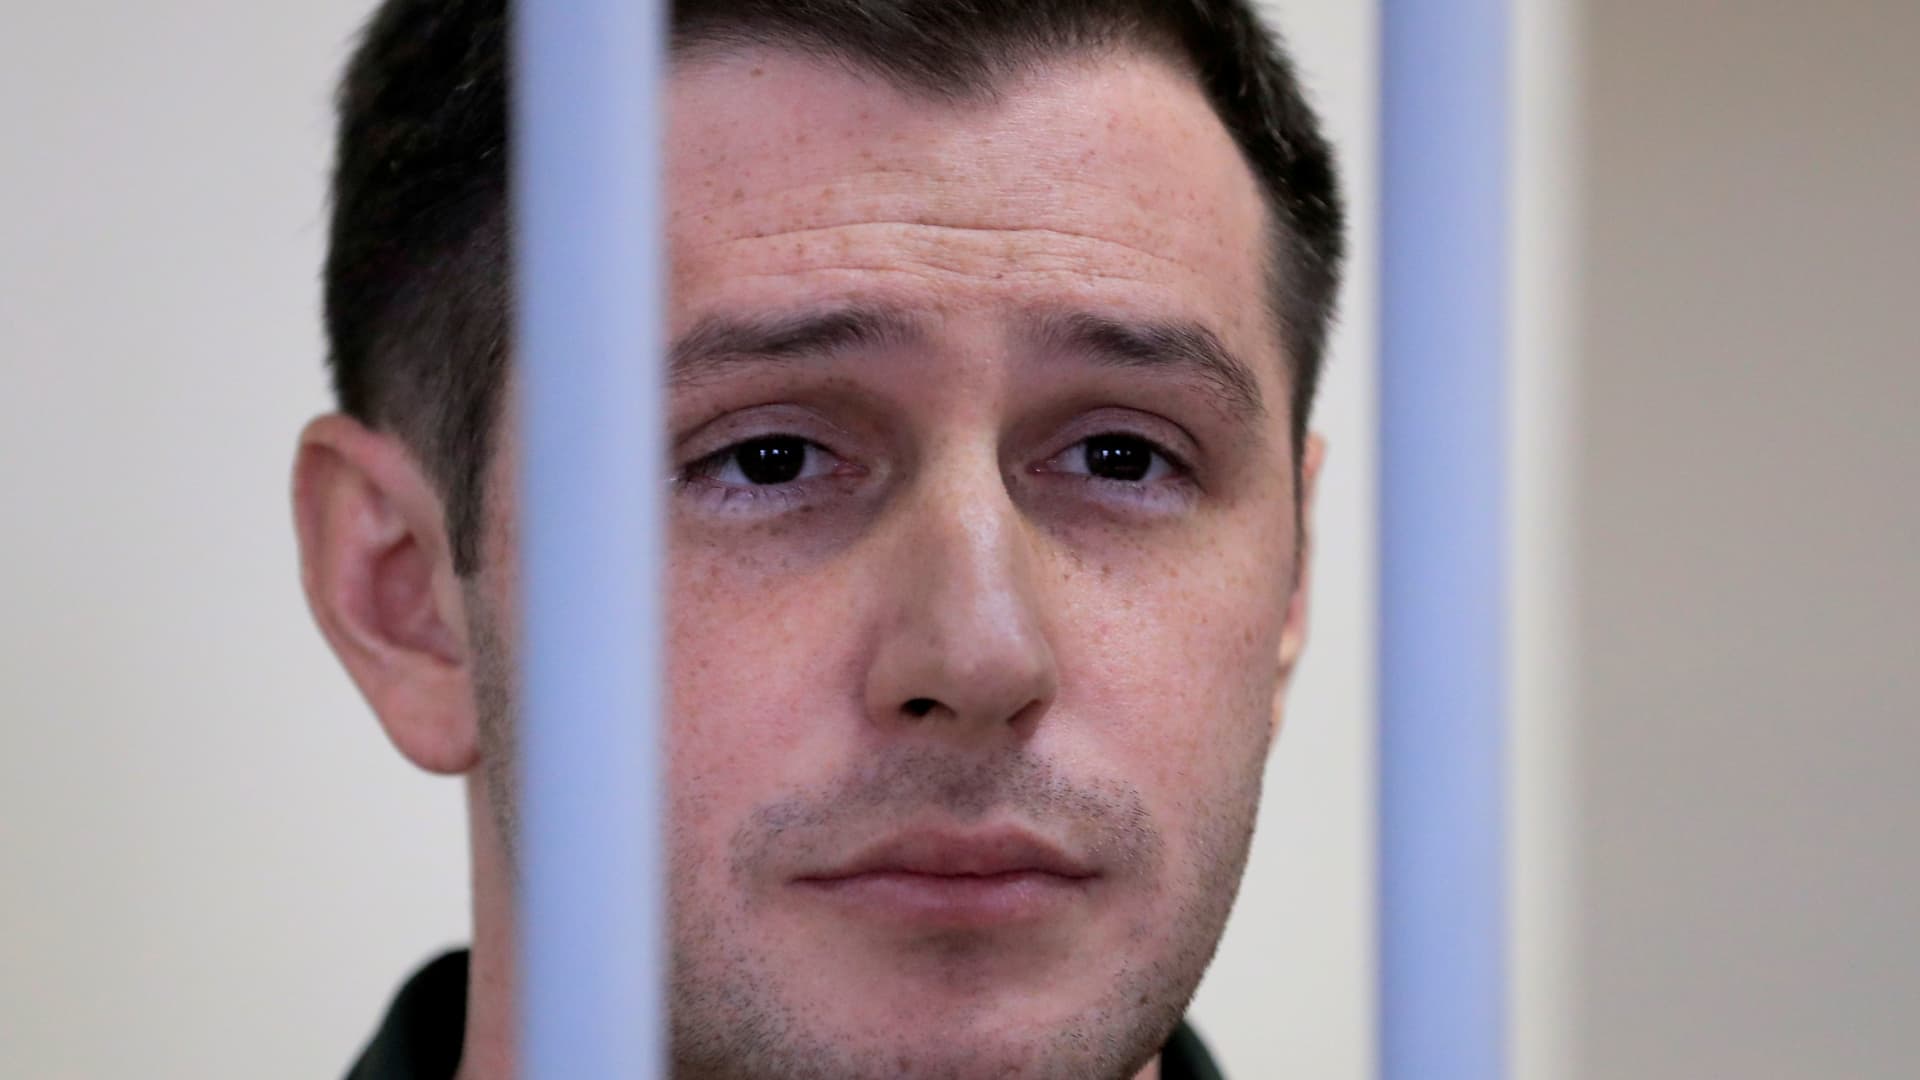 Former U.S. Marine Trevor Reed, who was detained in 2019 and accused of assaulting police officers, stands inside a defendants' cage during a court hearing in Moscow, Russia March 11, 2020.